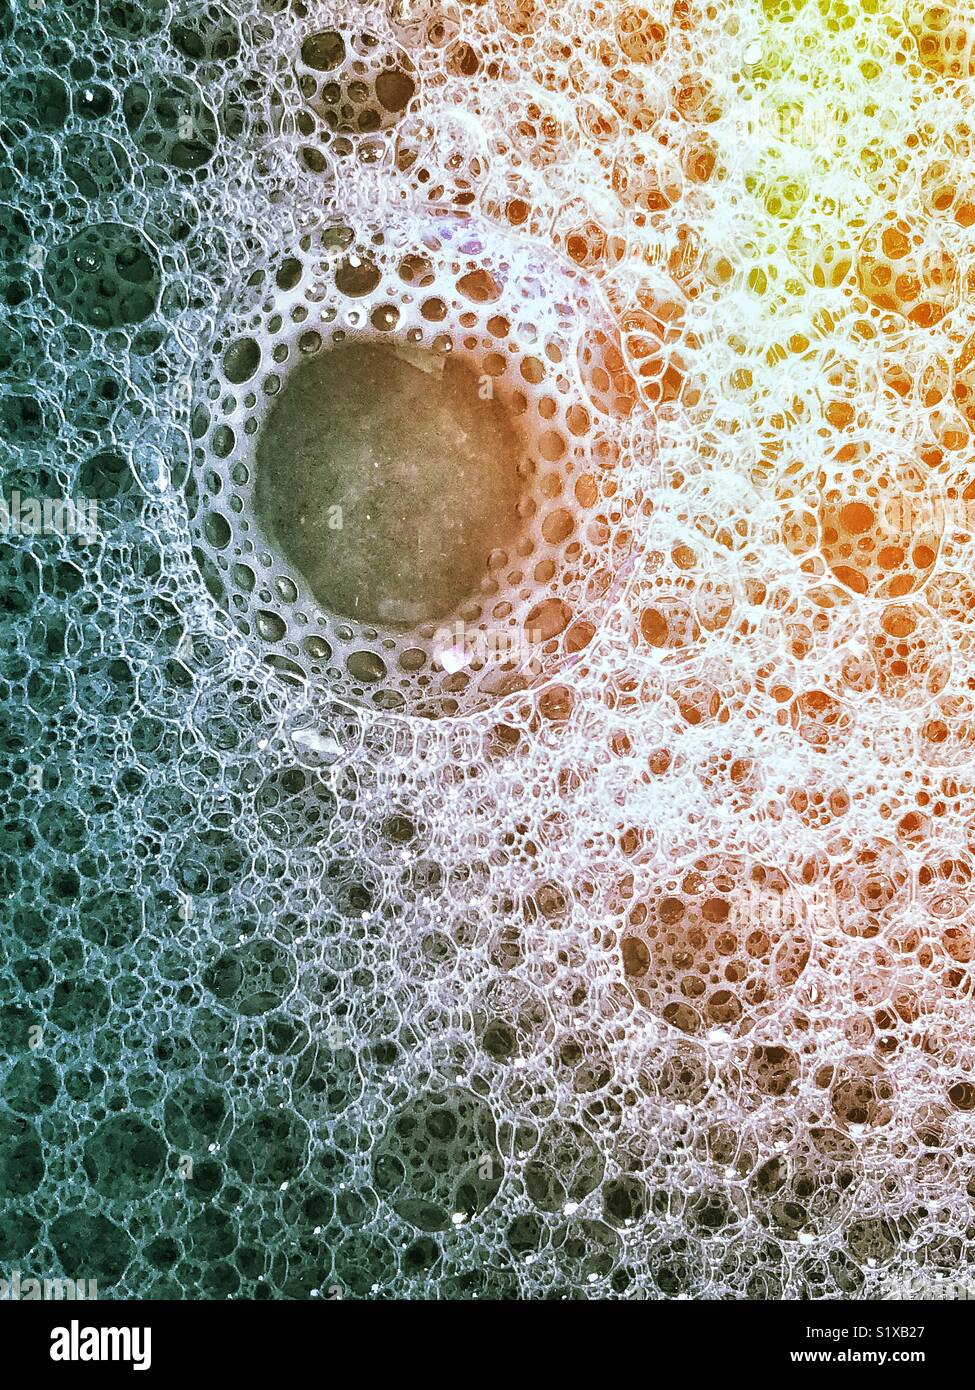 Closeup of large clear bubble surrounded by small and medium bubbles in a bubble bath with rainbow lighting effect Stock Photo